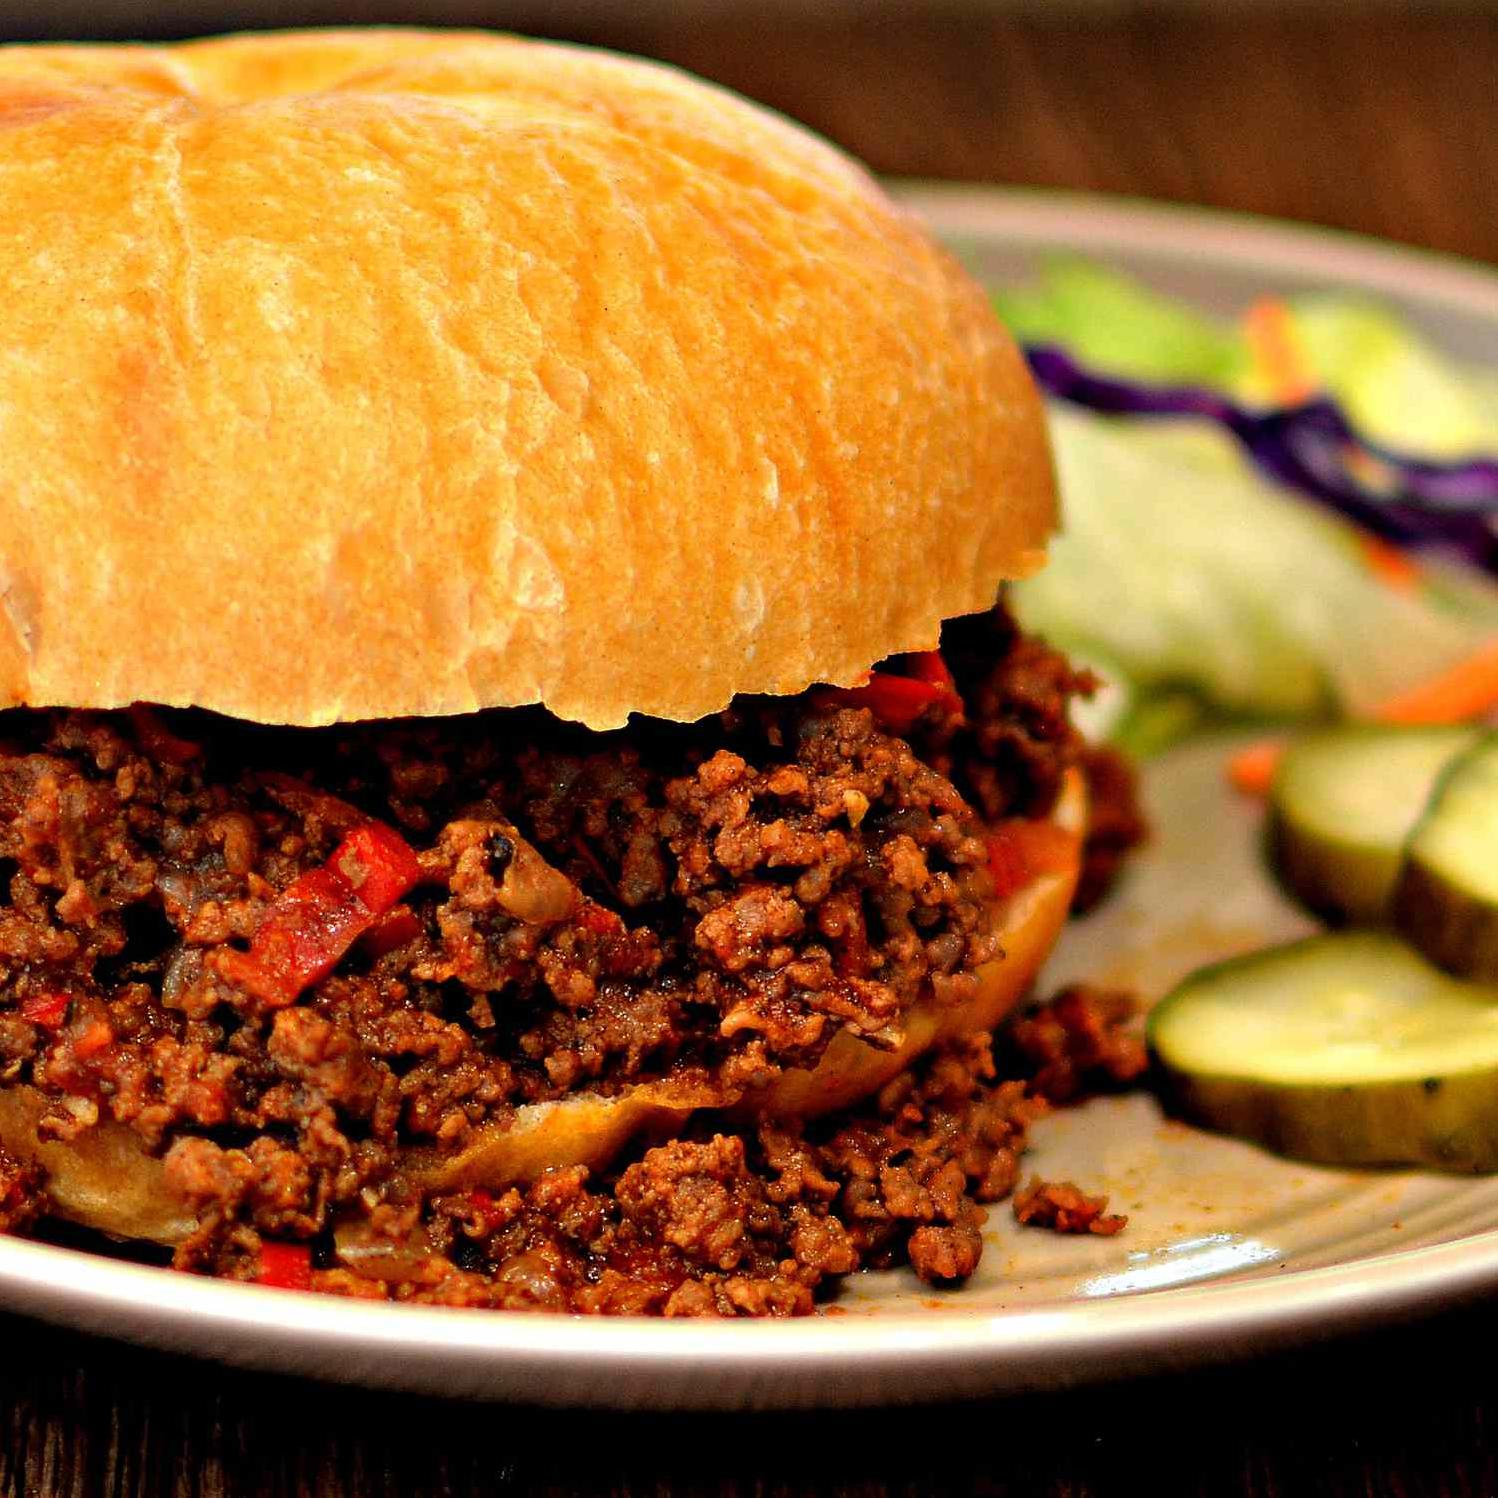  These Instant Pot Sloppy Joes are simply irresistible.